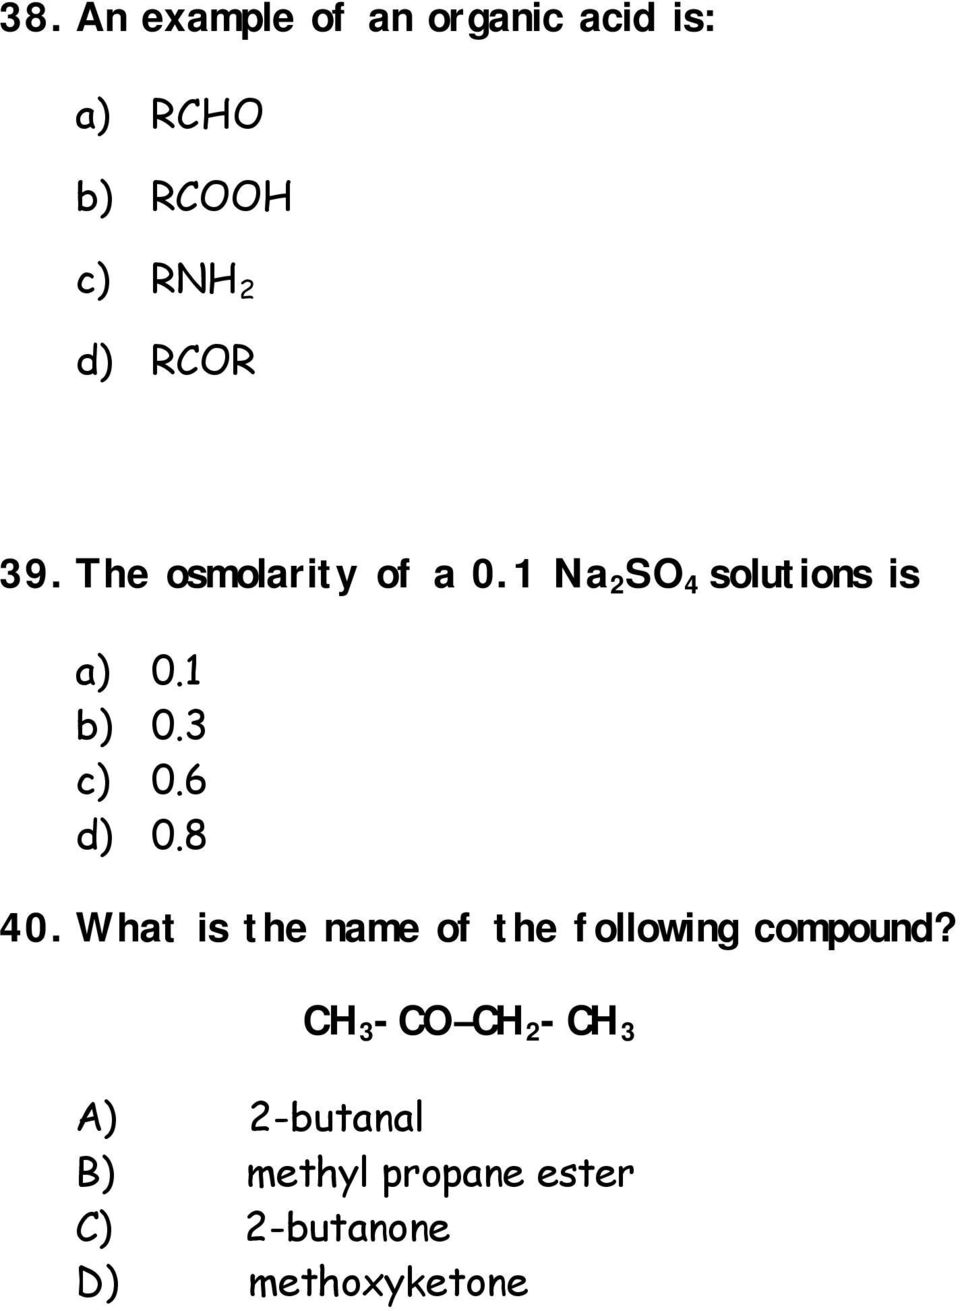 6 d) 0.8 40. What is the name of the following compound?